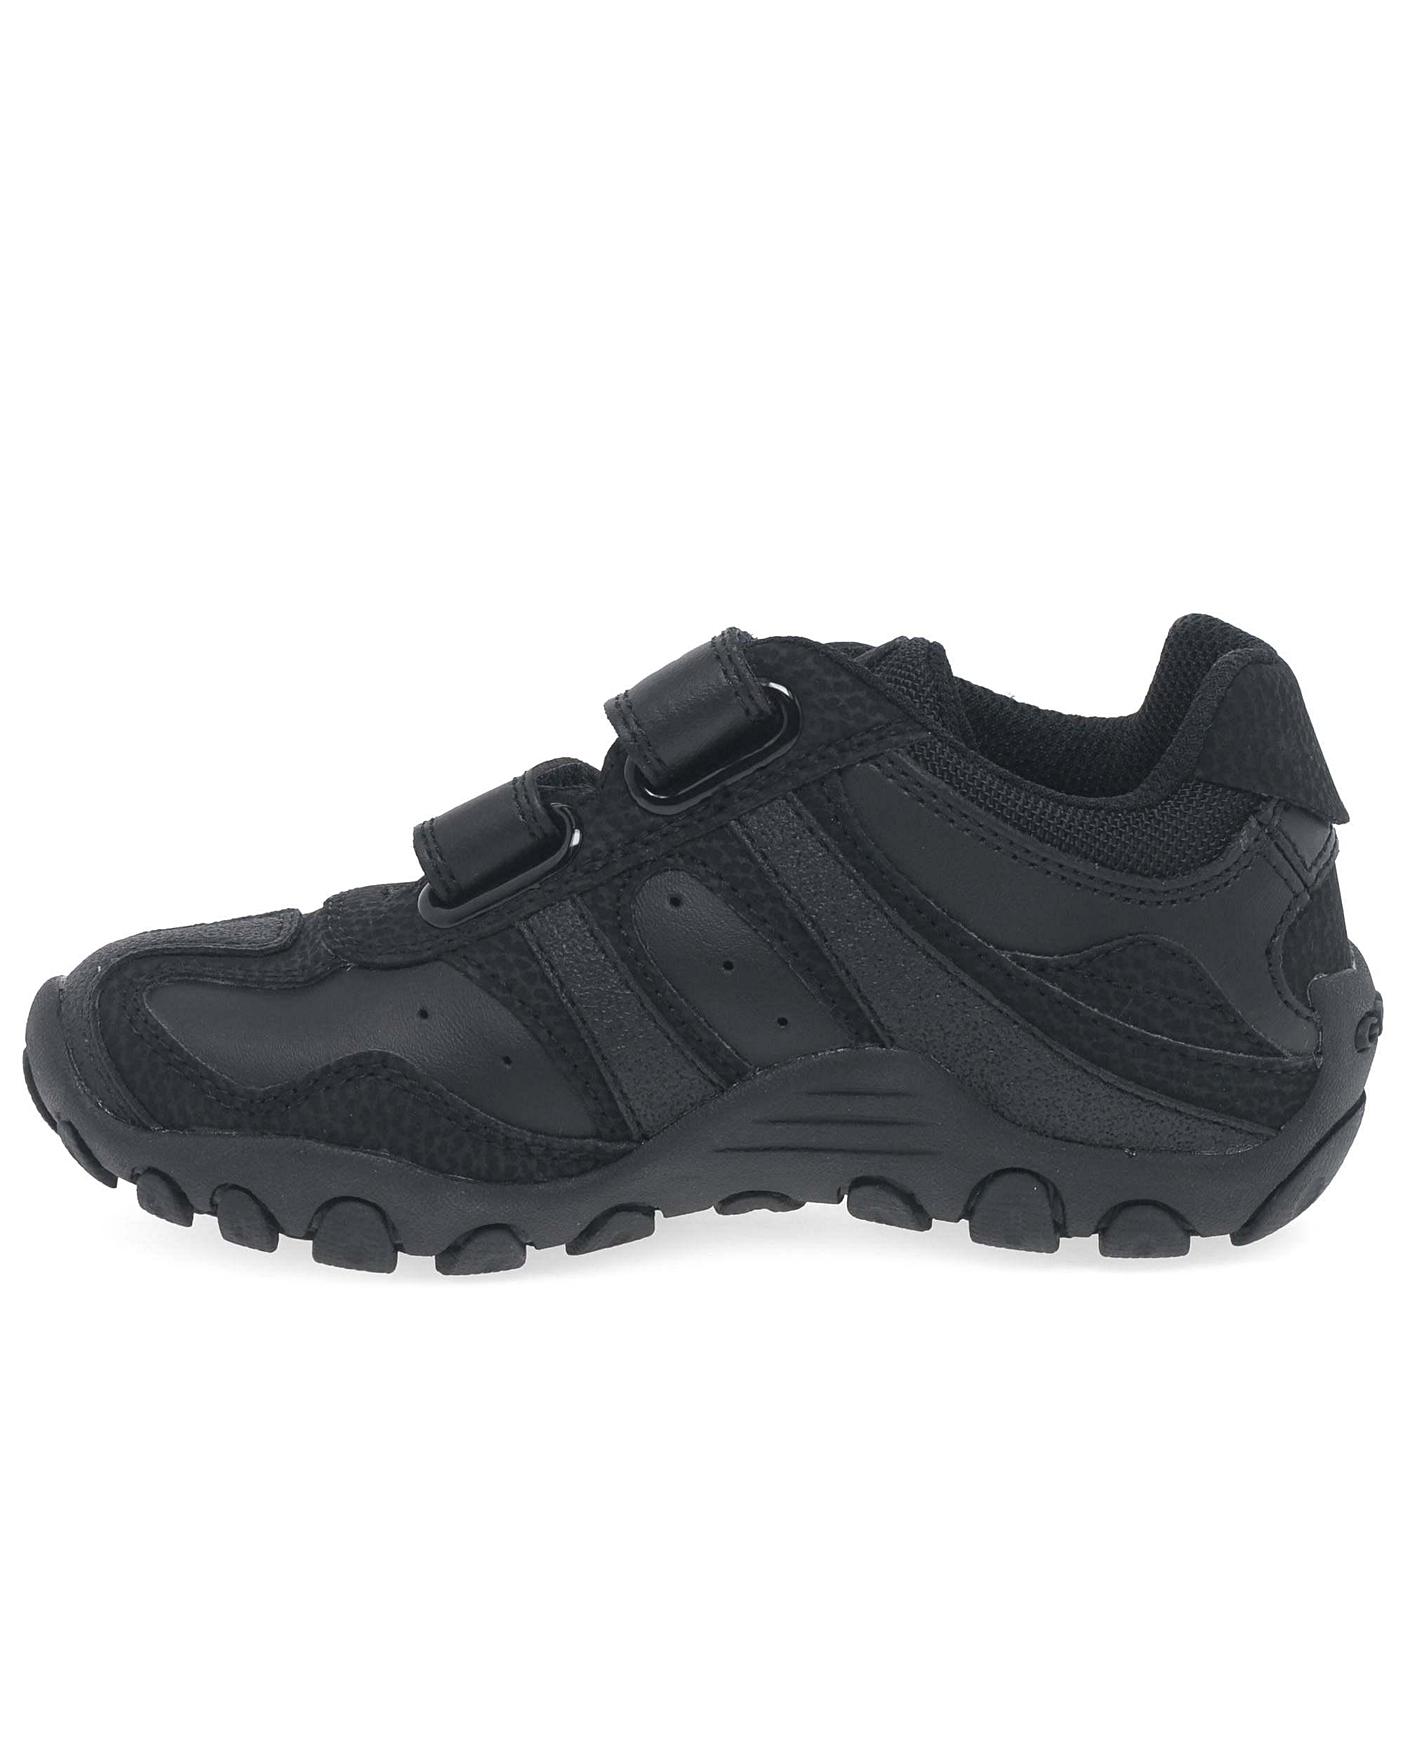 Geox F Fit School Shoes | Williams